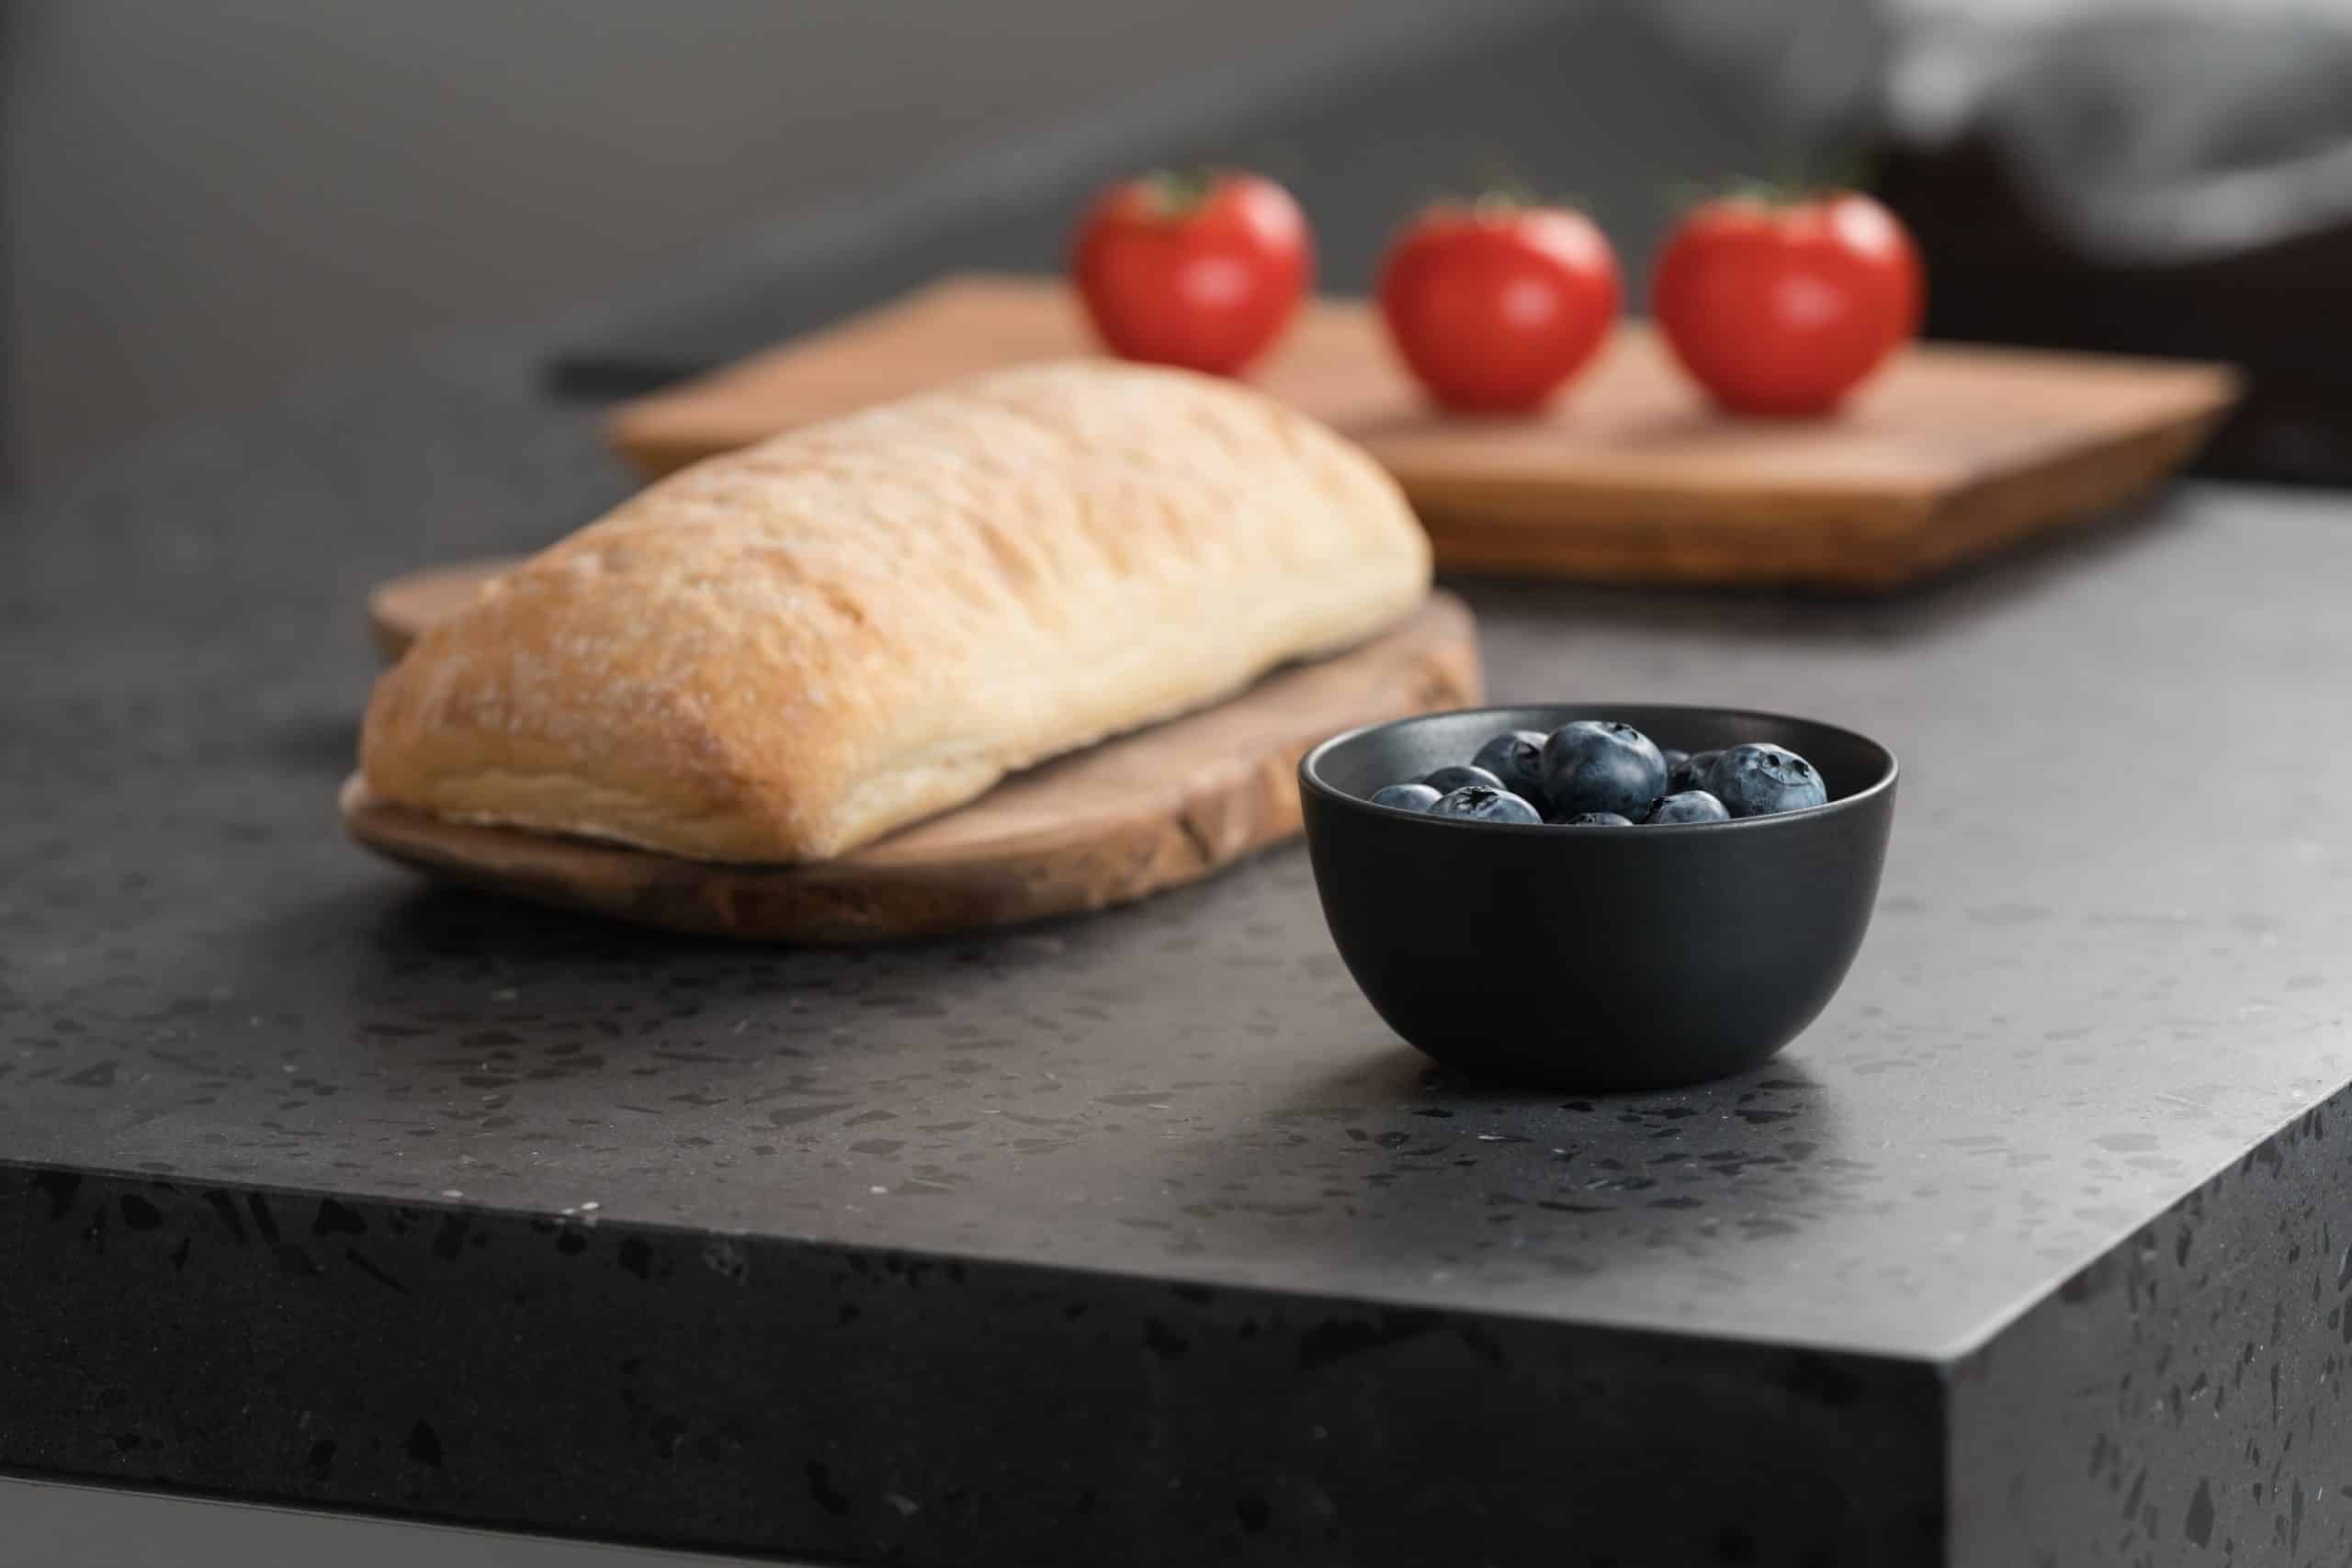 Bread and fruit sitting on concrete kitchen countertop